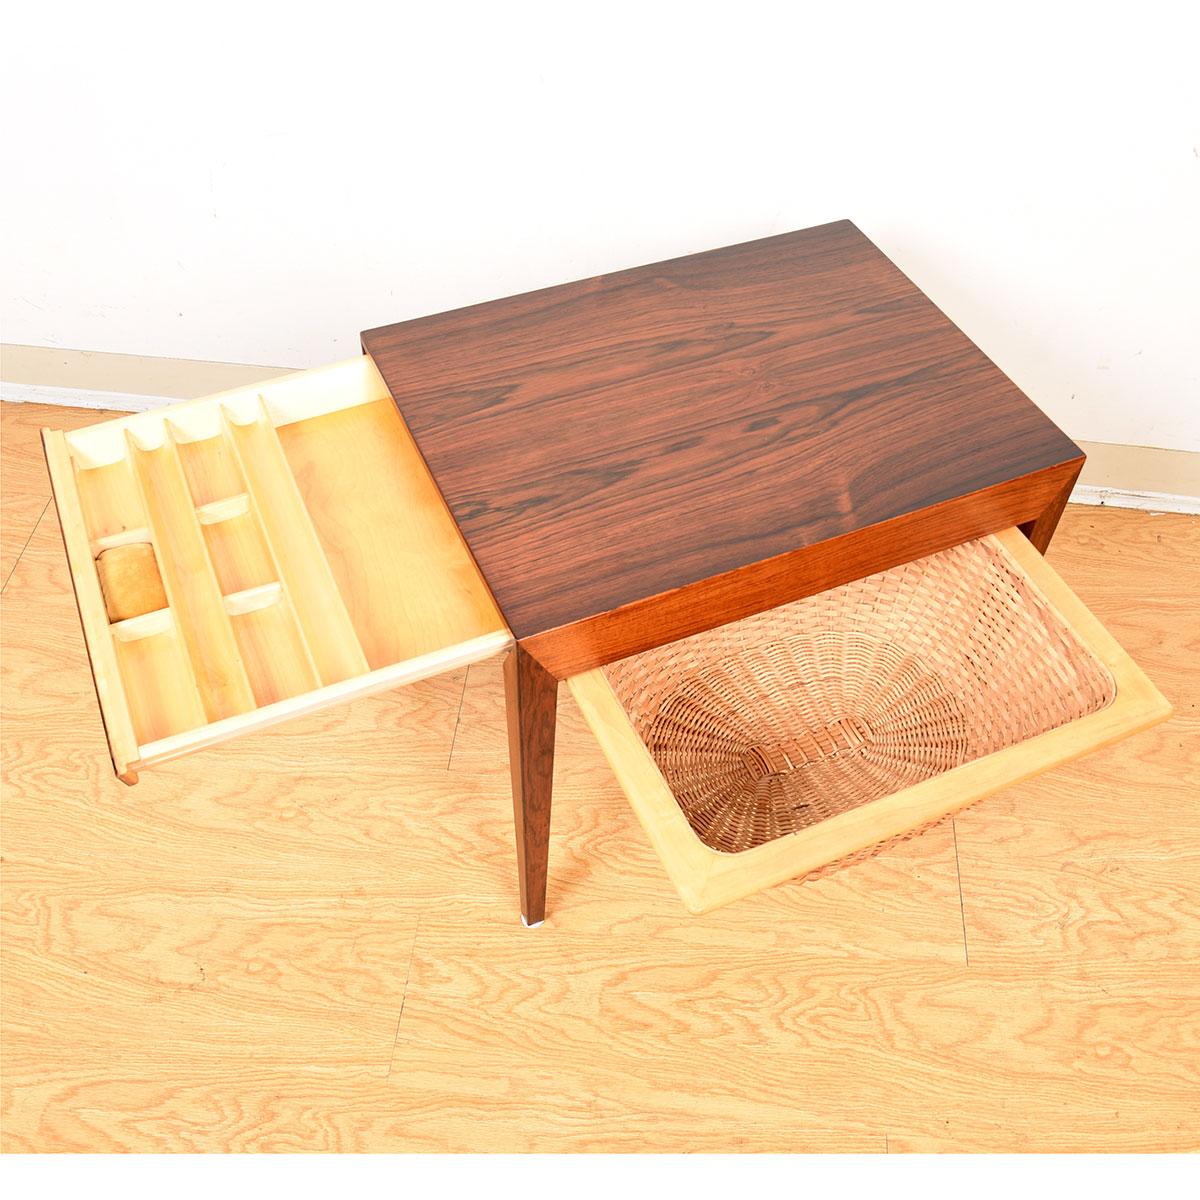 20th Century Pair of Danish Rosewood Night Stands /Sewing Basket Tables with Storage Drawer